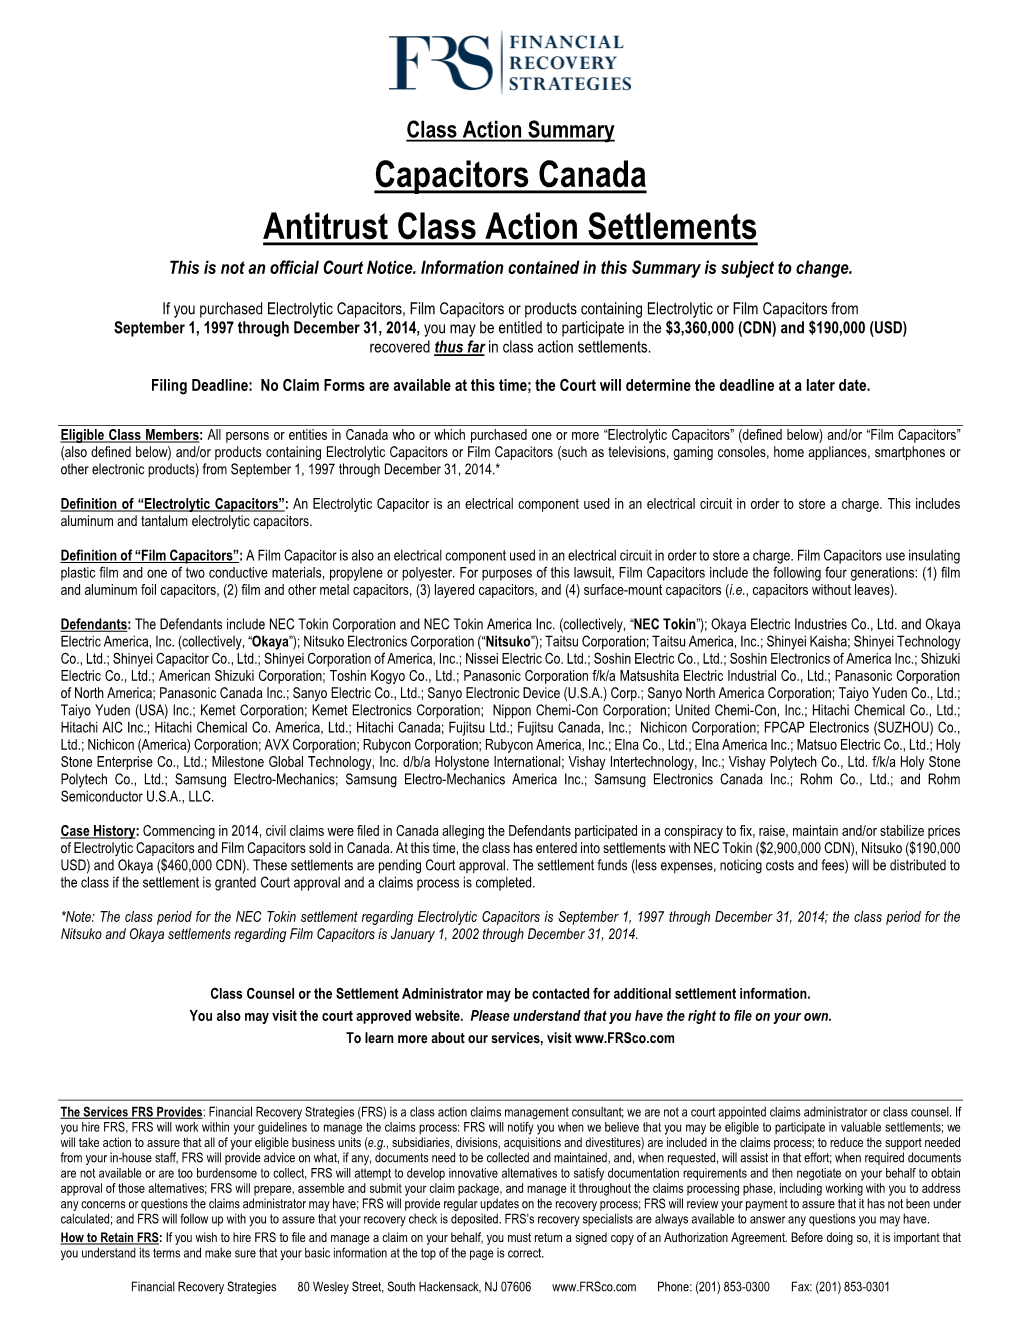 Capacitors Canada Antitrust Class Action Settlements This Is Not an Official Court Notice